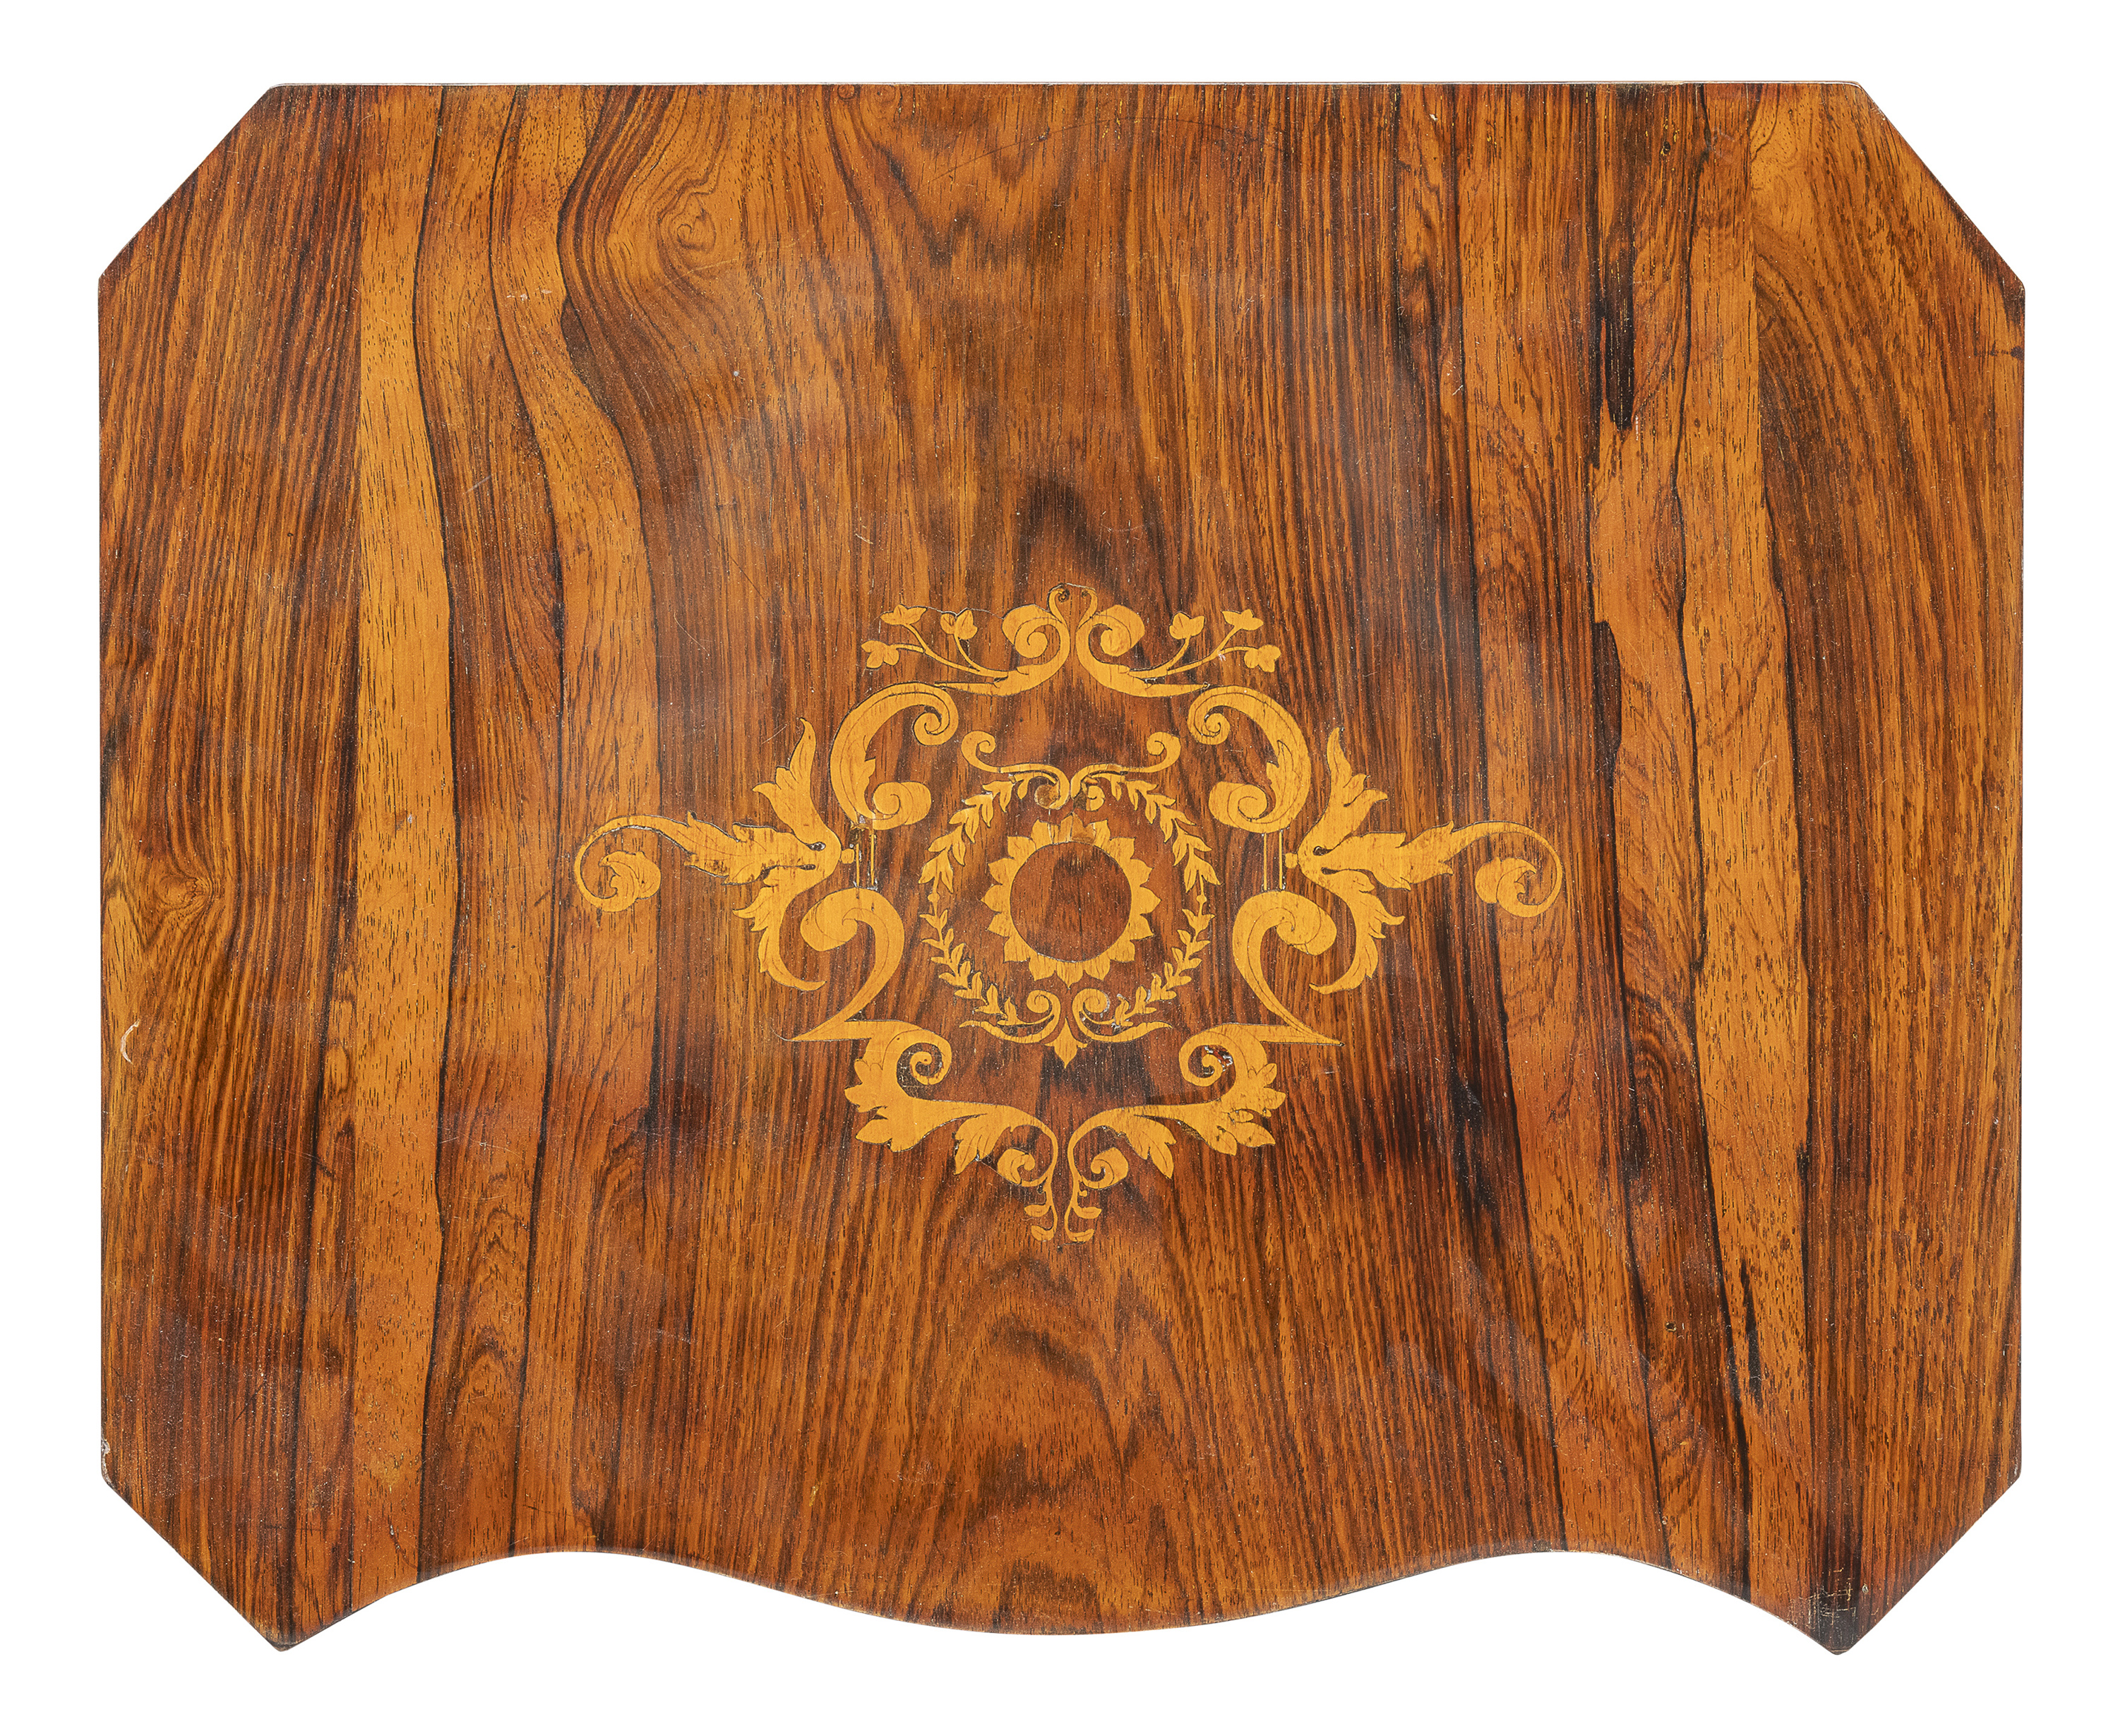 BEAUTIFUL ROSEWOOD WORK TABLE 19th CENTURY - Image 2 of 2